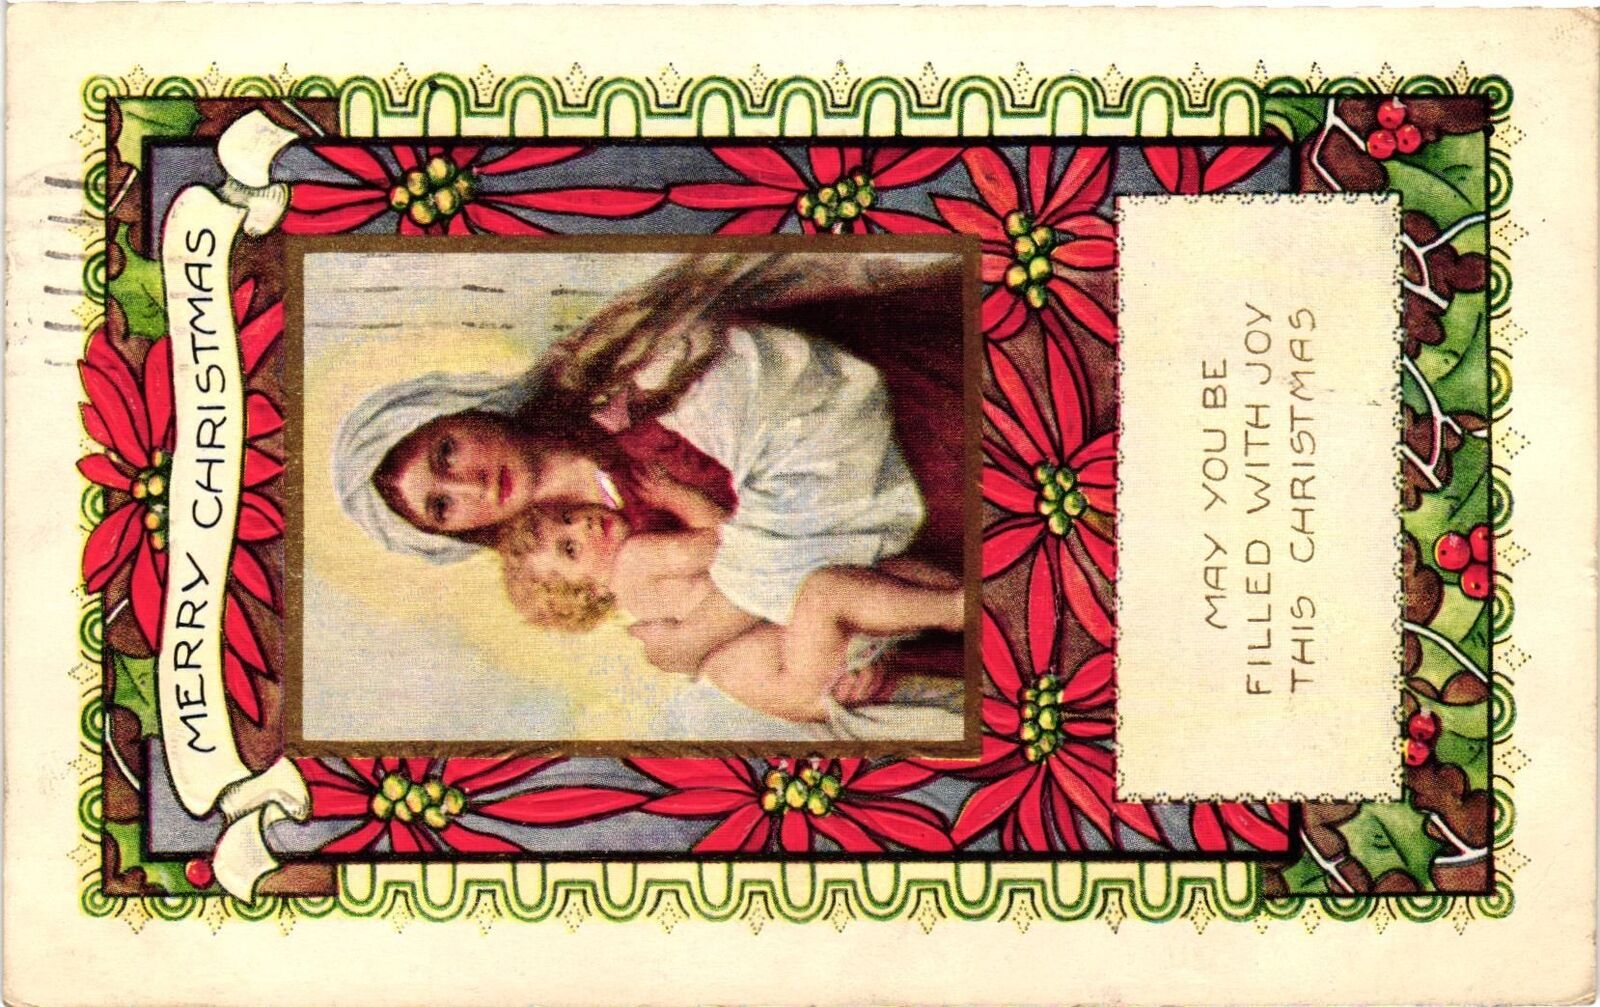 Vintage Postcard- May you be filled with hoy this Christmas.